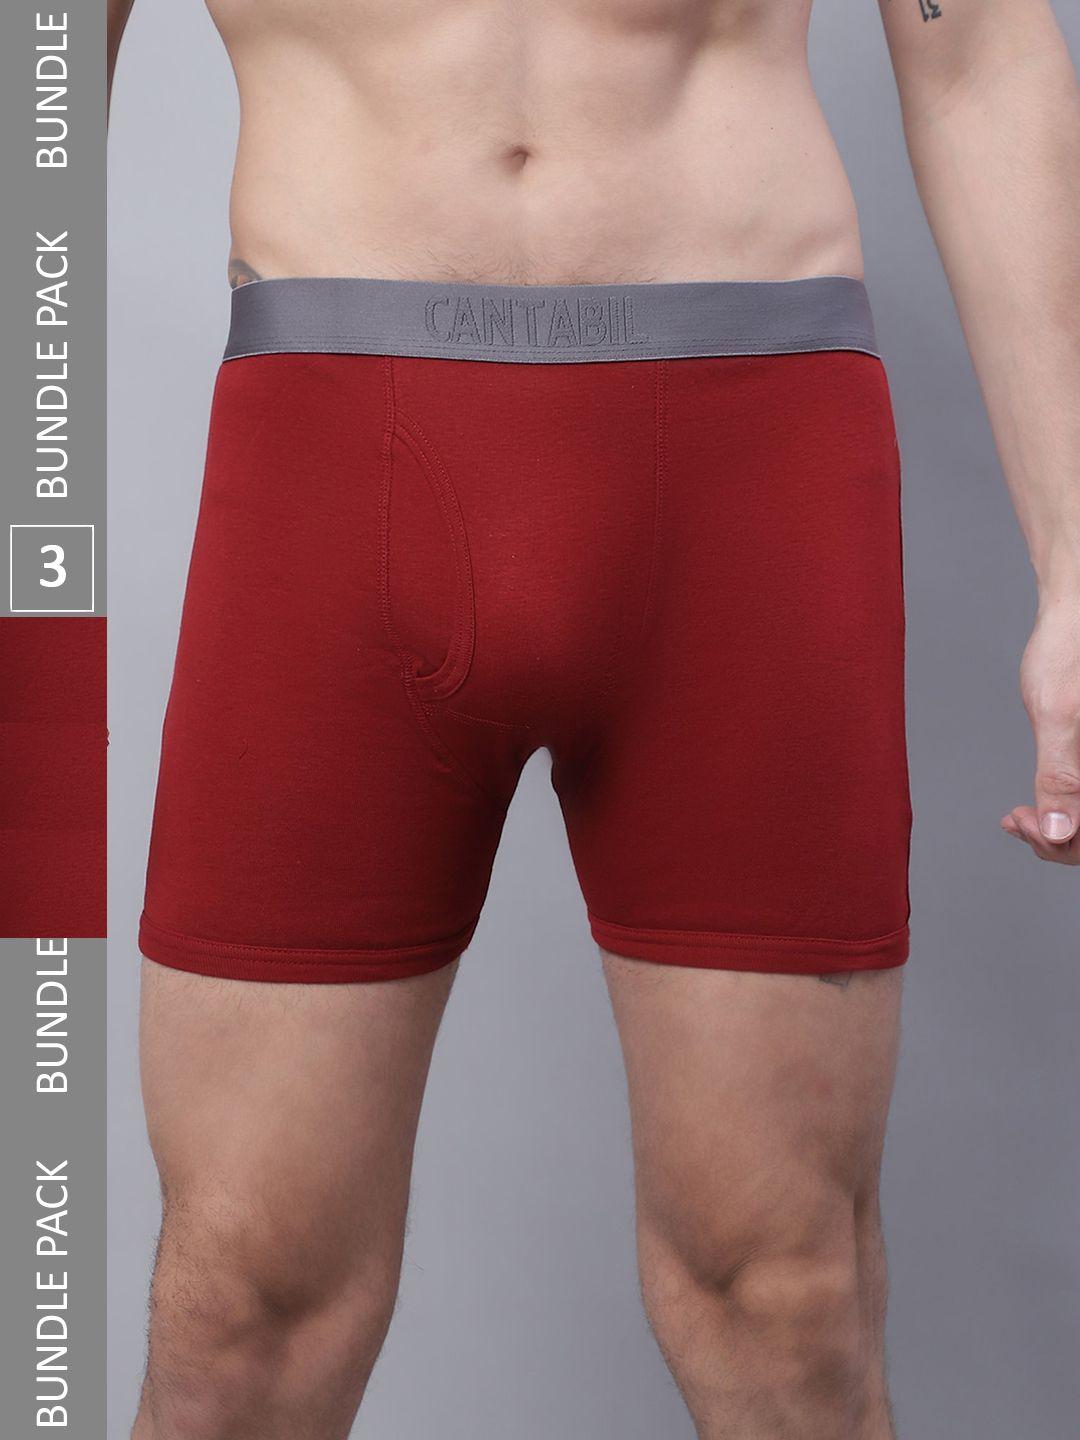 cantabil-men-pack-of-3-cotton-basic-briefs